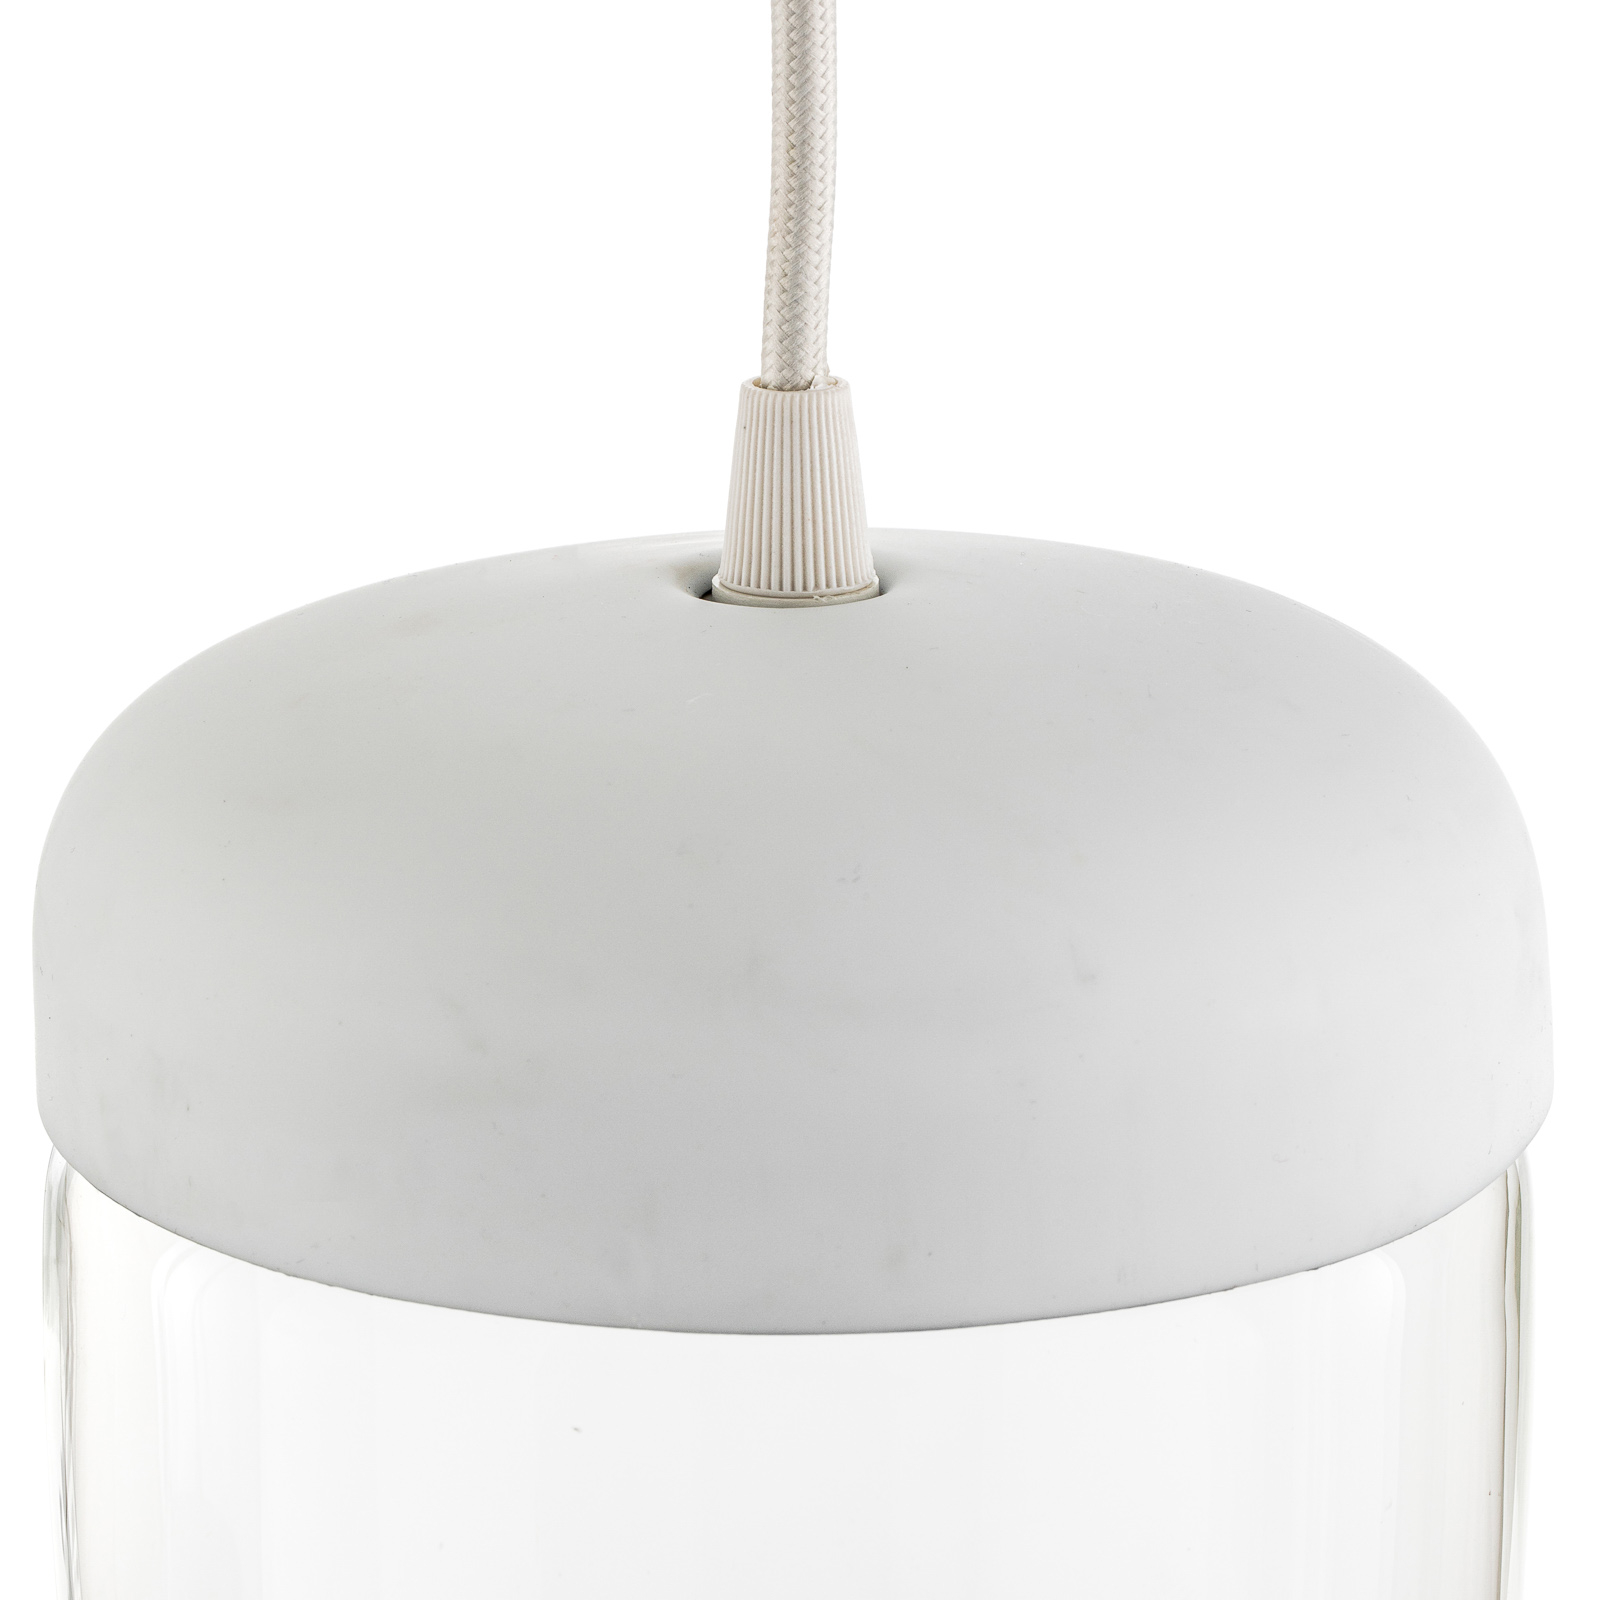 UMAGE Acorn hanglamp wit/staal, 2-lamps